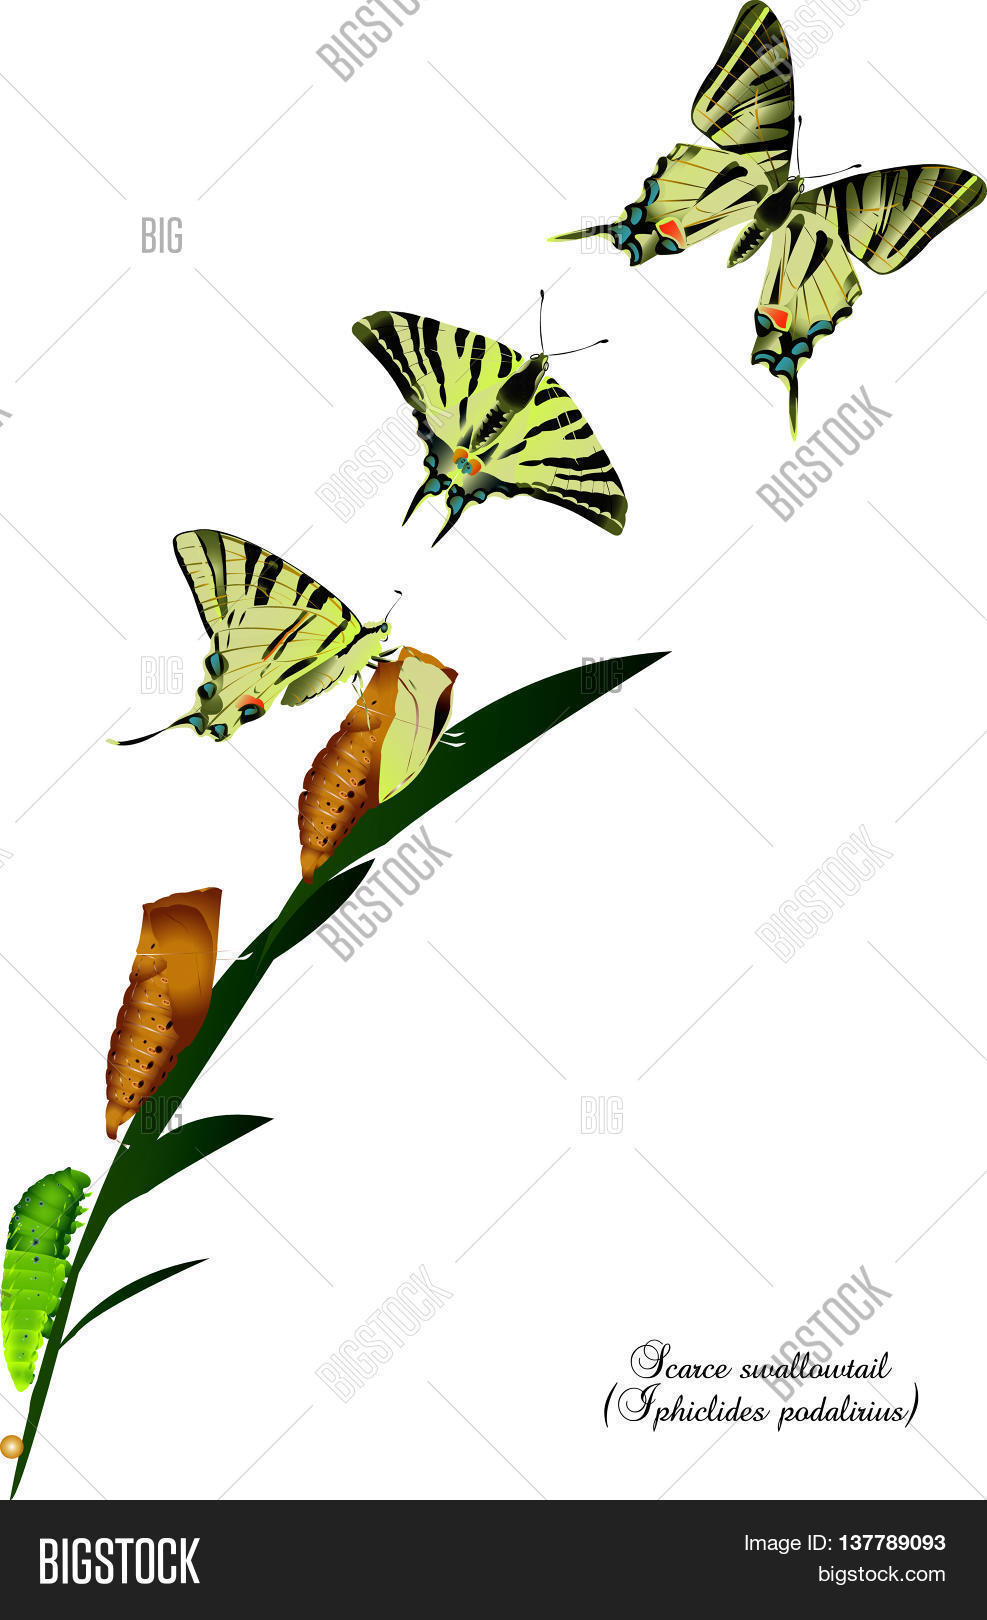 It is illustration of life cycle of scarce swallowtail. Stock.